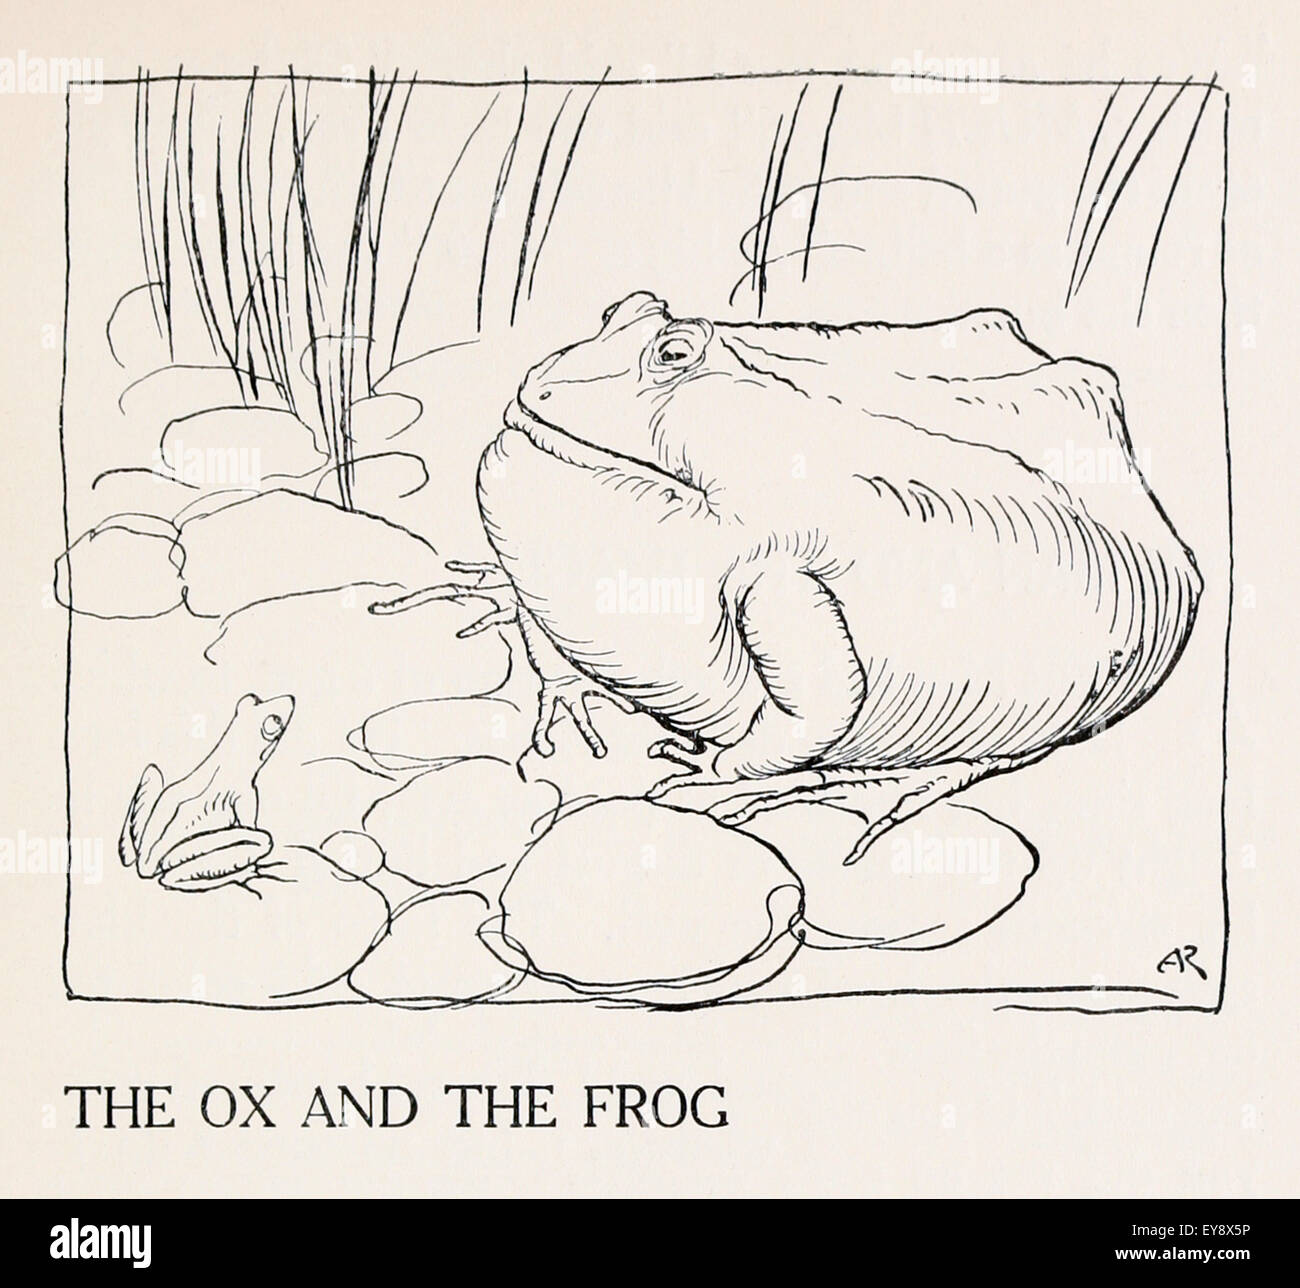 'The Frog and the Ox' fable by Aesop (circa 600BC).  A frog tries to inflate itself to the size of an ox, but bursts in the attempt. Conceit may lead to self-destruction. IIllustration by Arthur Rackham (1867-1939). See description for more information. Stock Photo